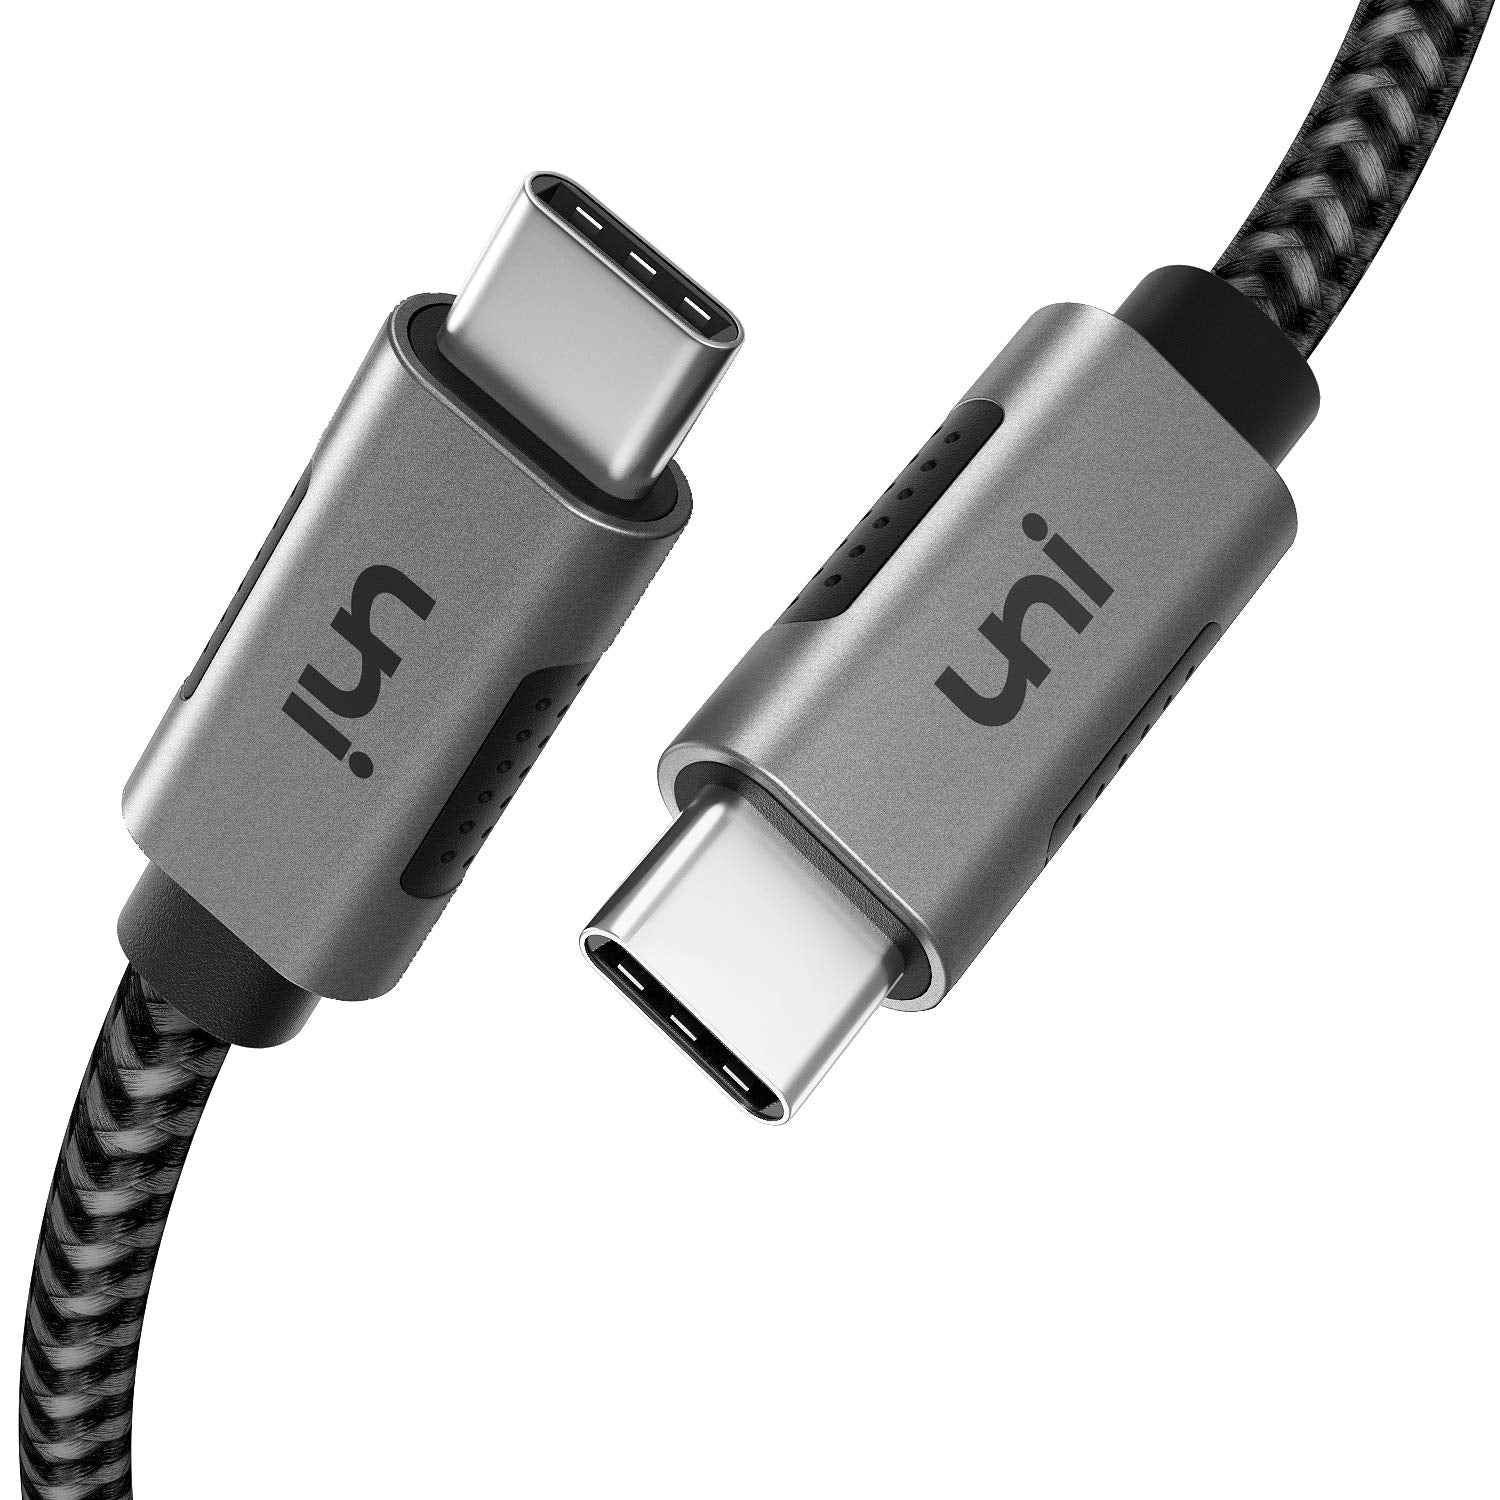 USB-C to USB C Video Cable